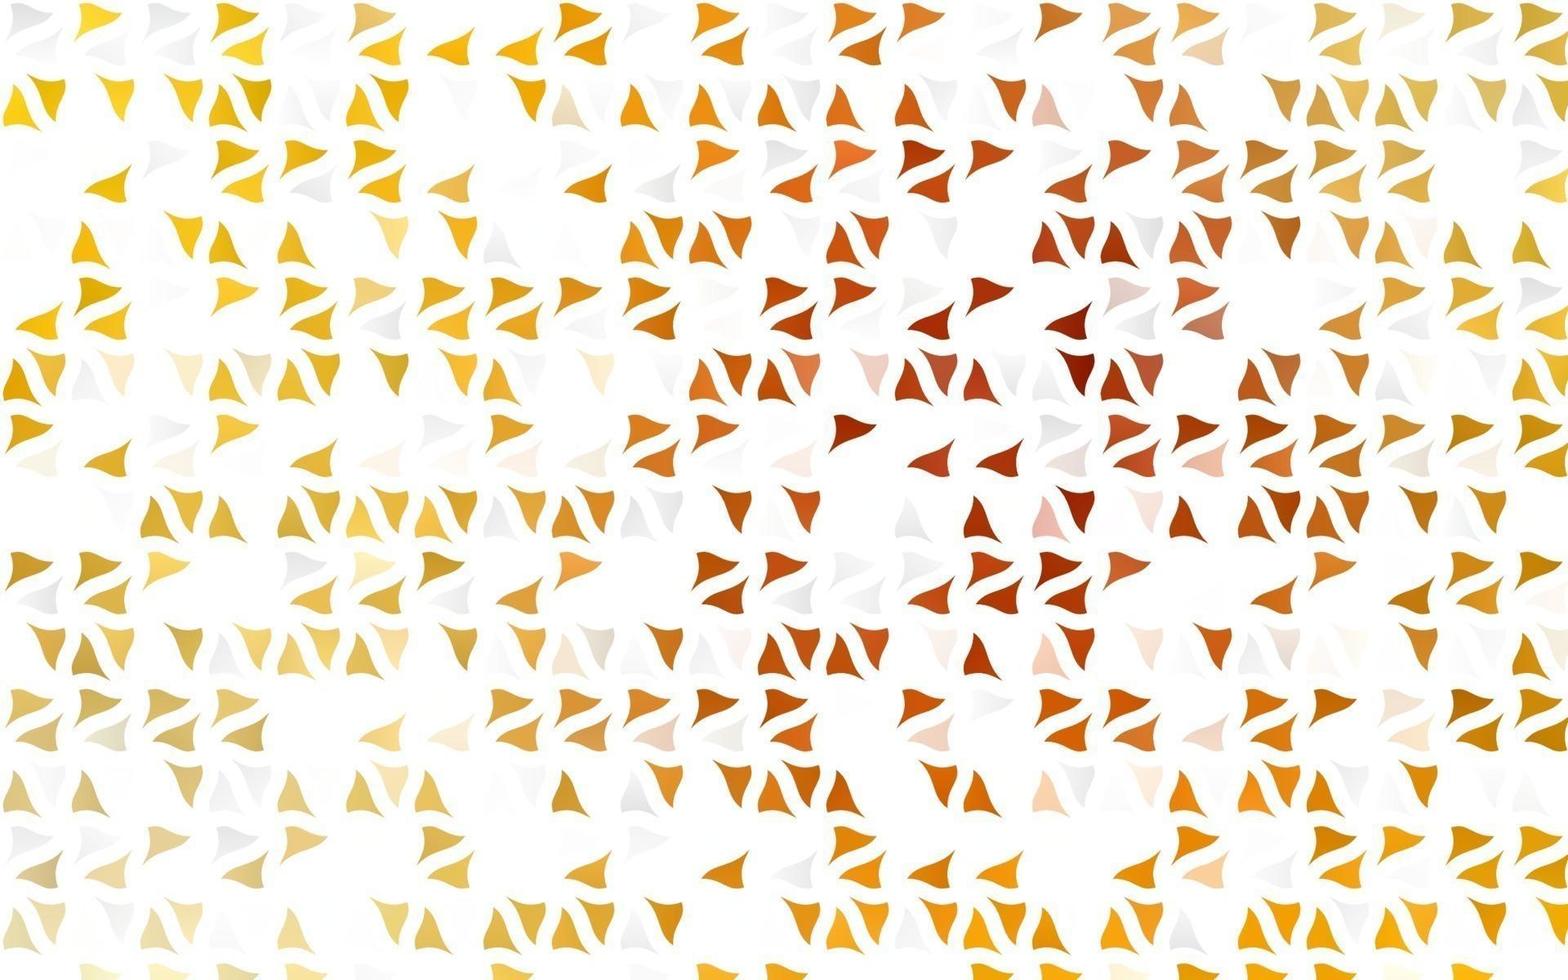 Light Yellow, Orange vector cover in polygonal style.